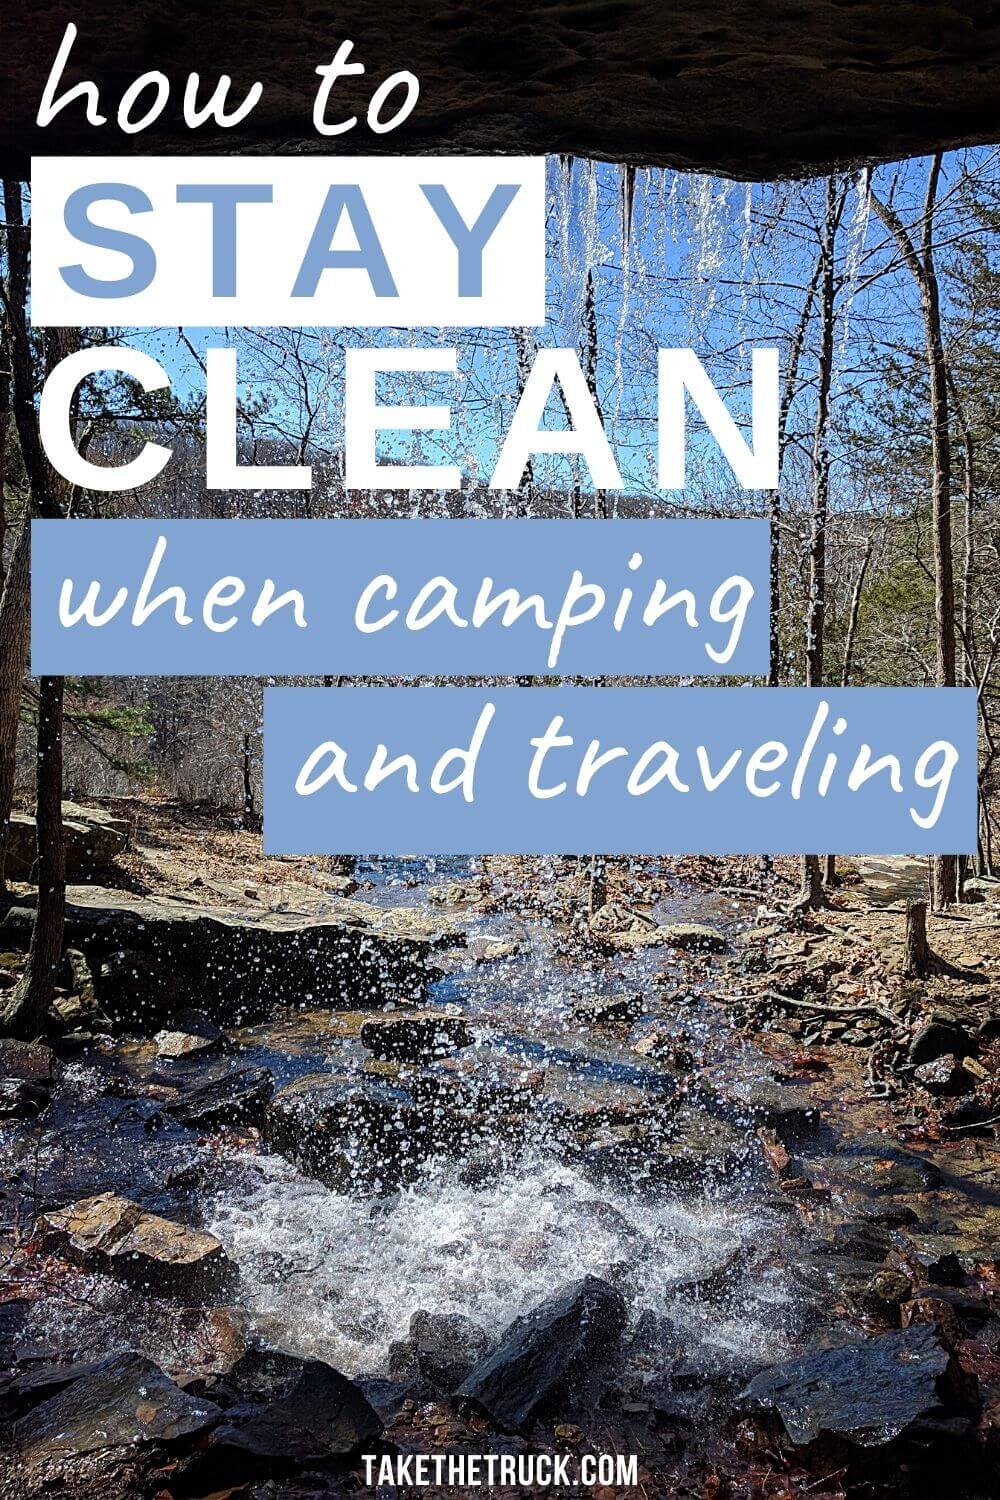 Wondering how to shower &amp; stay clean when camping or boondocking? This post tells exactly how to bathe while camping, giving all kinds of camping hygiene hacks &amp; tips for your camping trip.